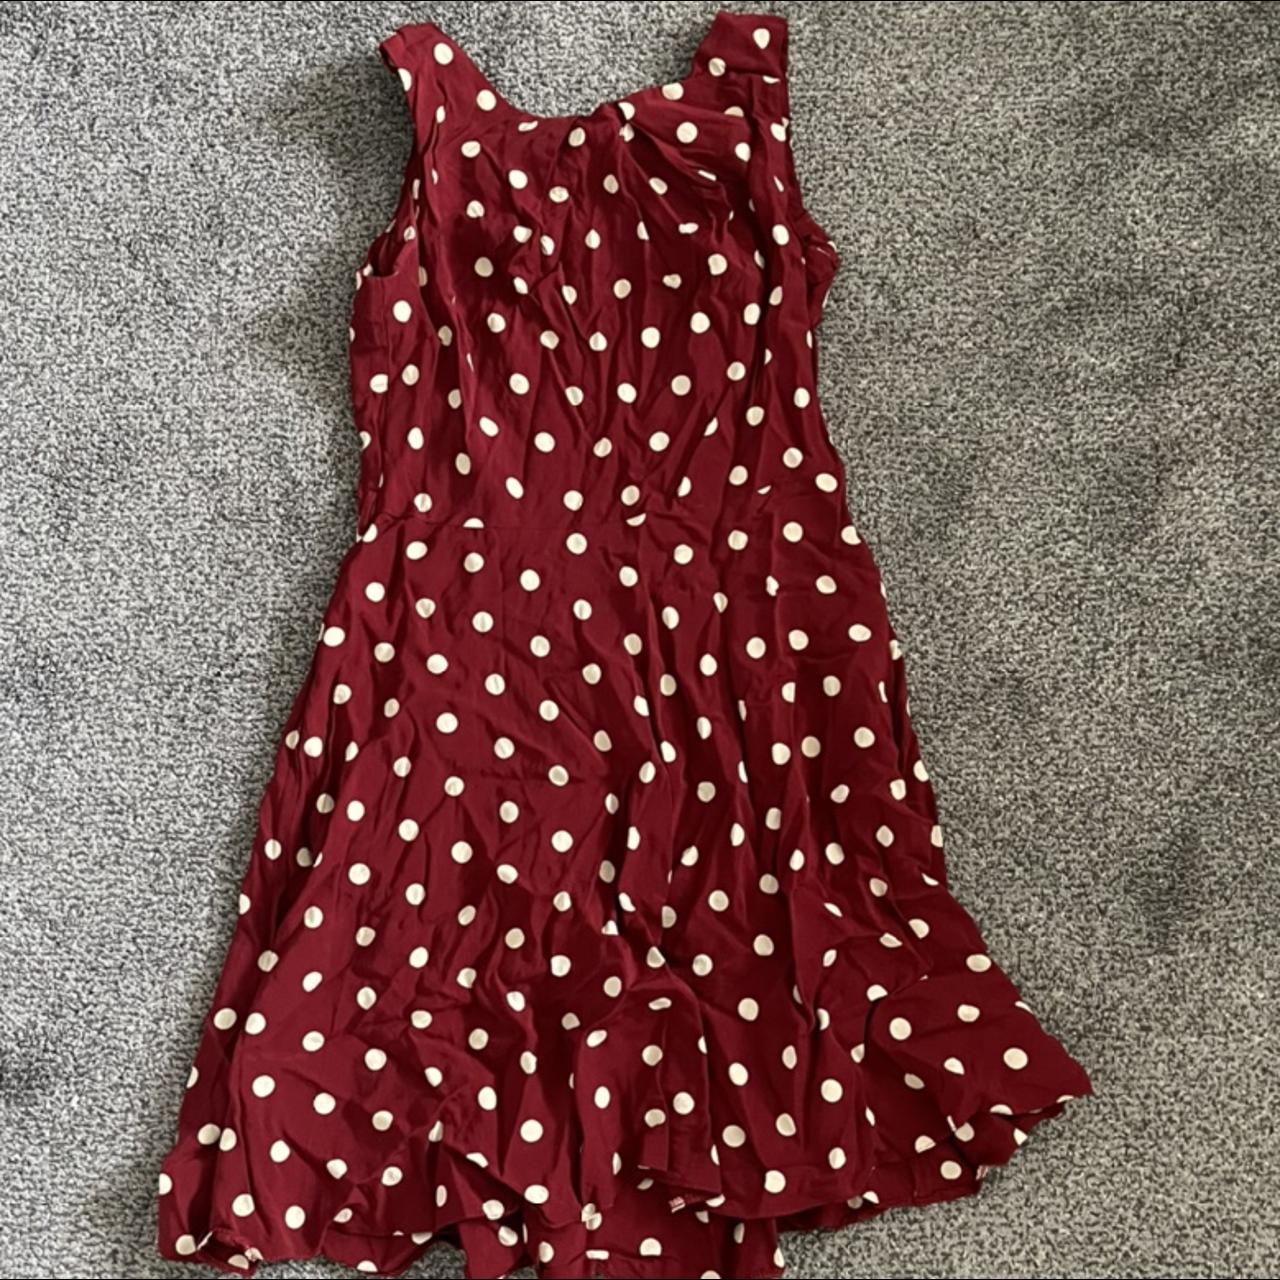 Product Image 3 - Red and white polka dot